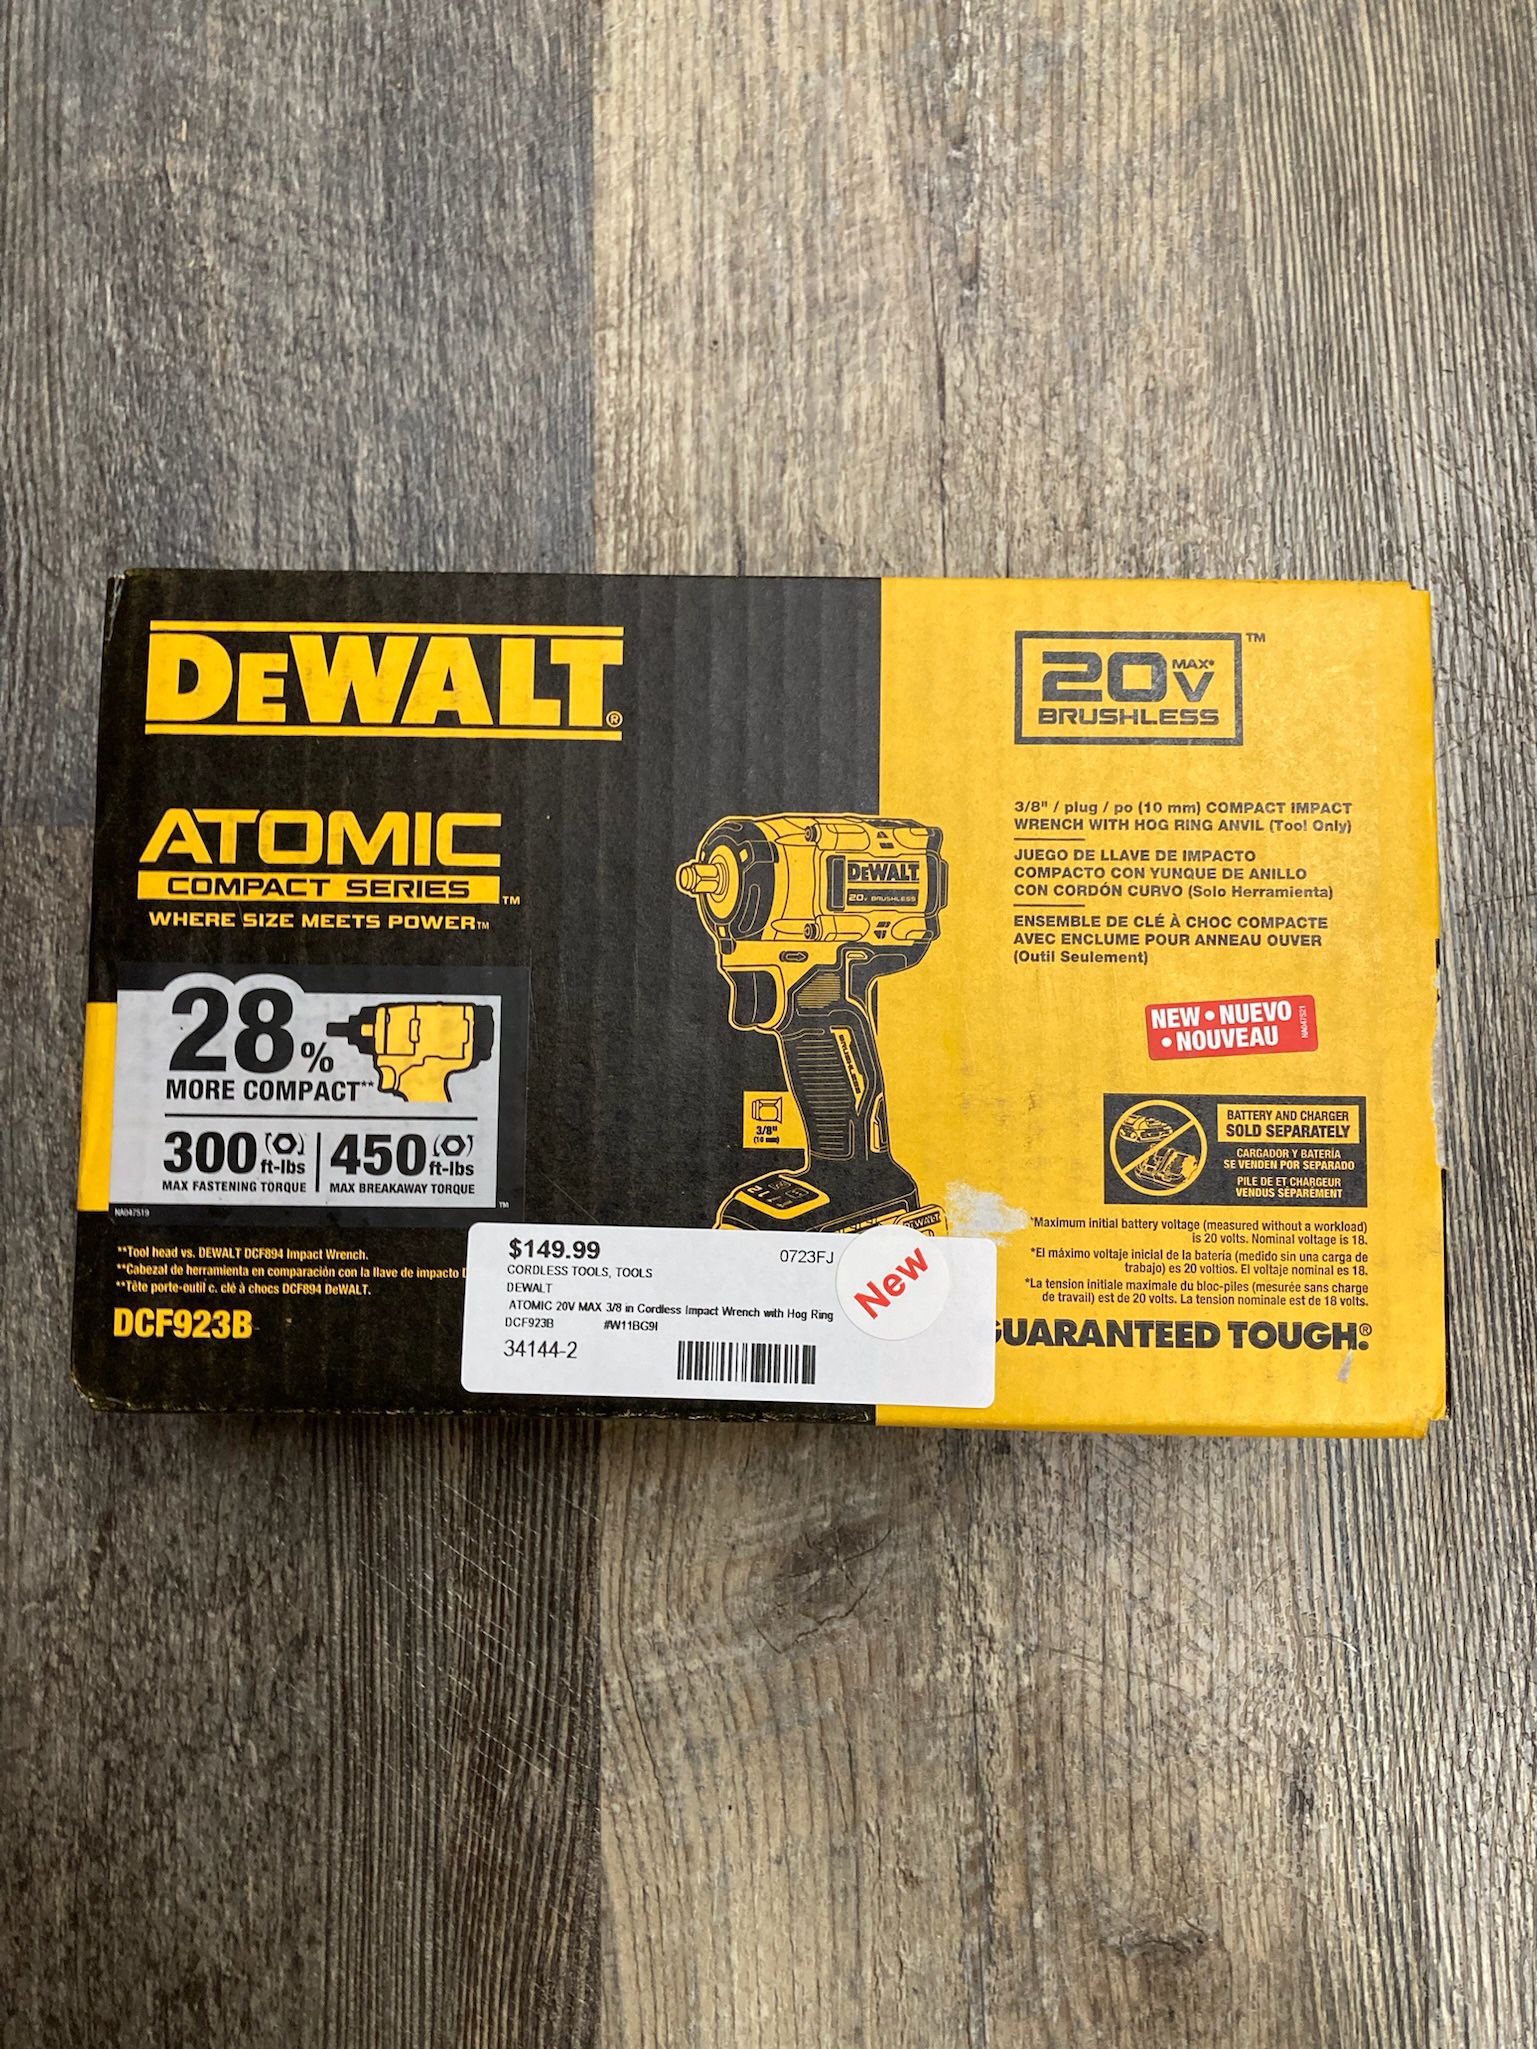 DeWalt DCF923B 20V Brushless 3/8" Compact Impact Wrench with Hog Ring Anvil 